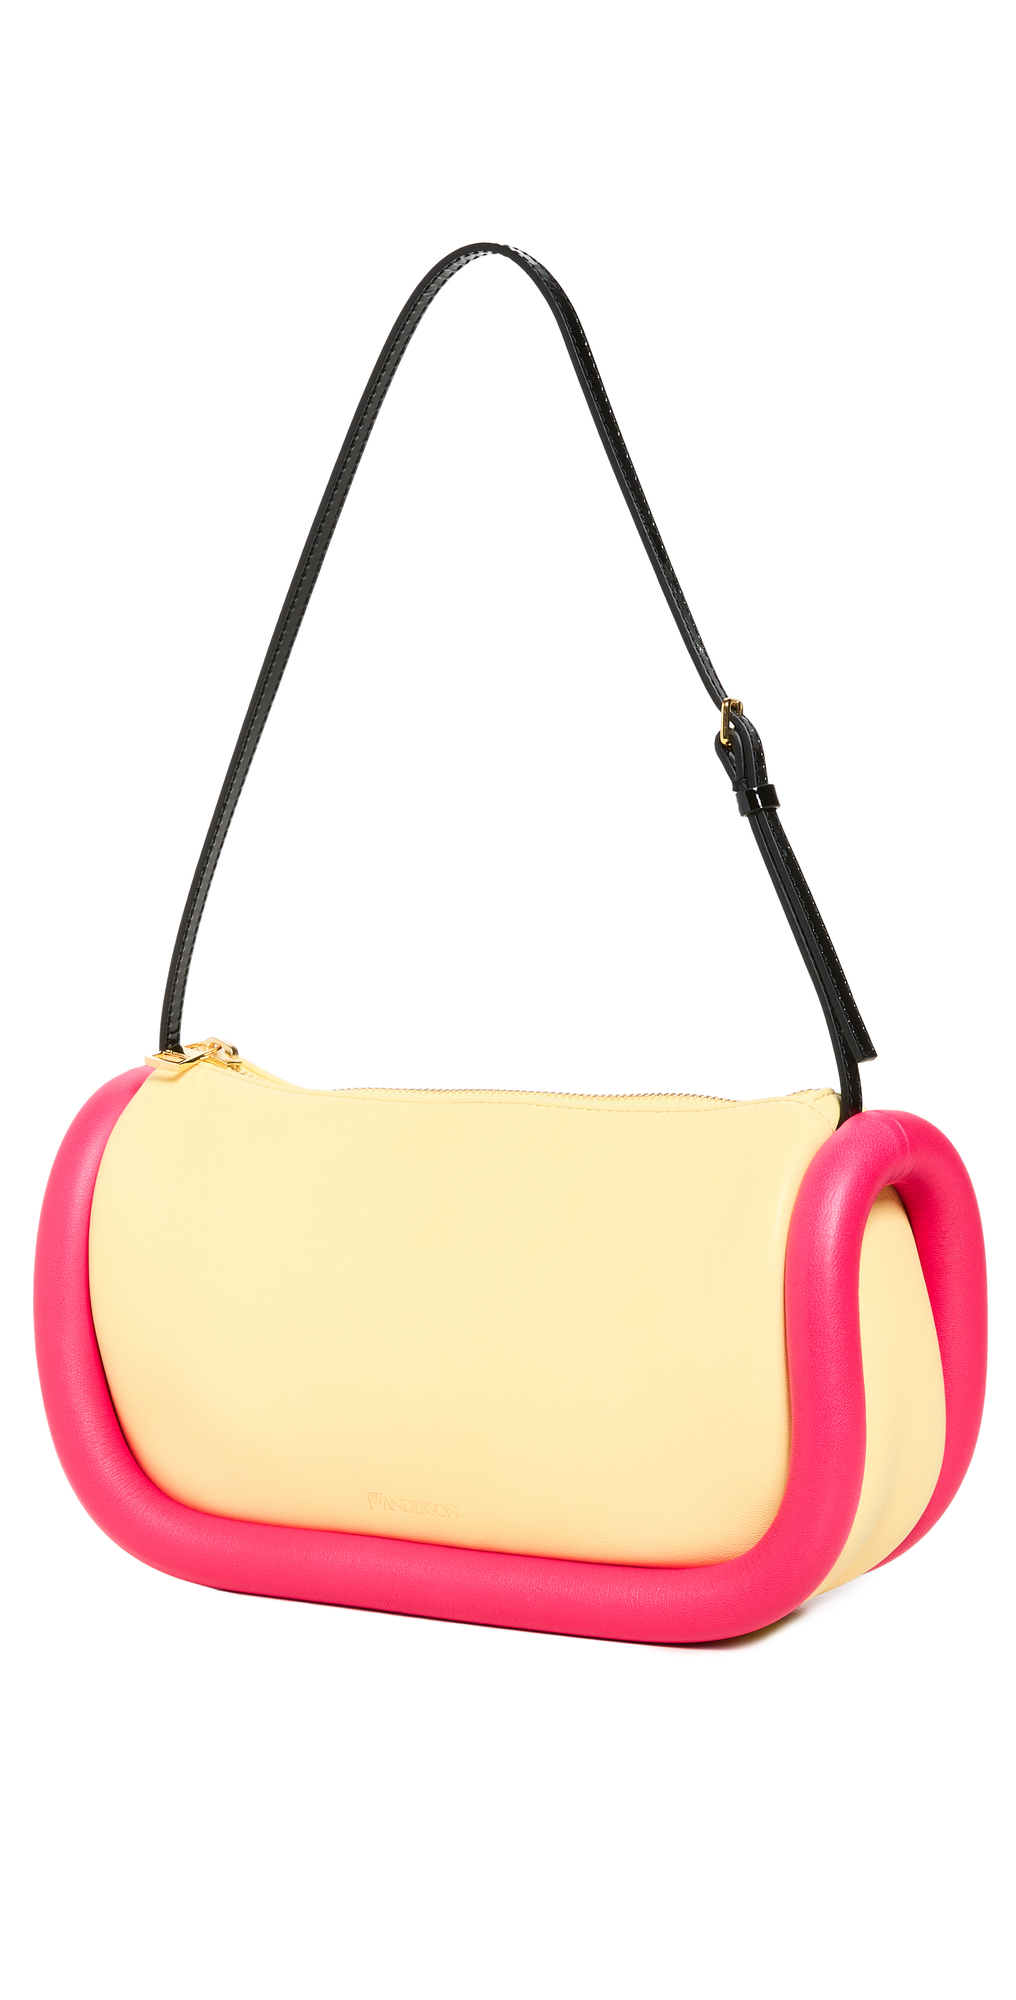 JW Anderson The Bumper Baguette Bag in pink / yellow